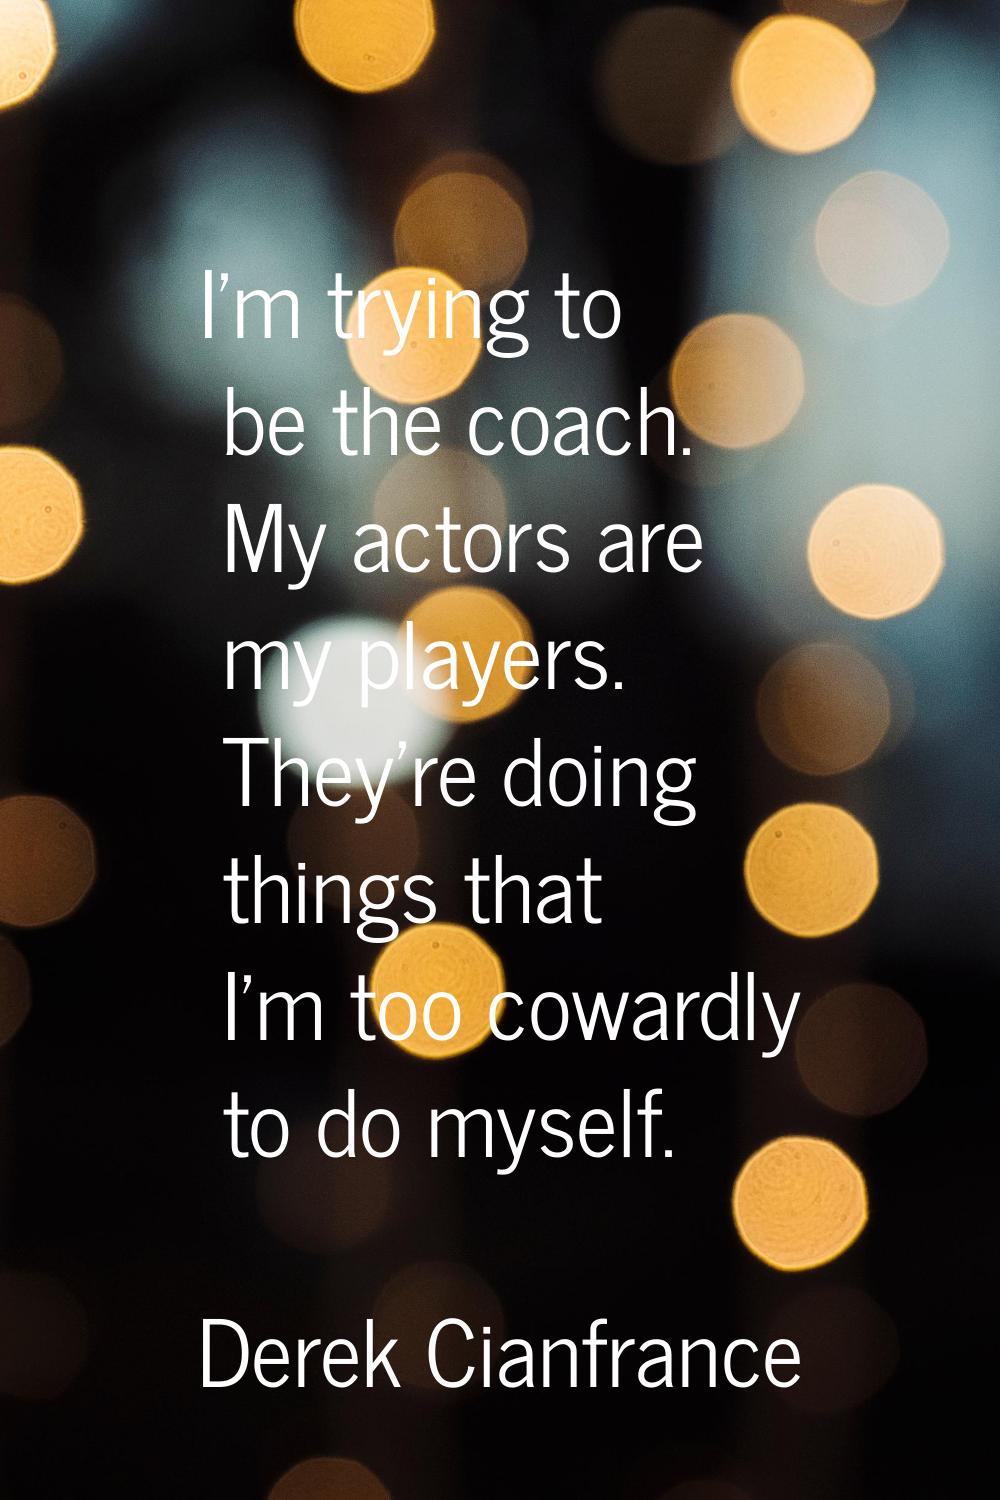 I'm trying to be the coach. My actors are my players. They're doing things that I'm too cowardly to